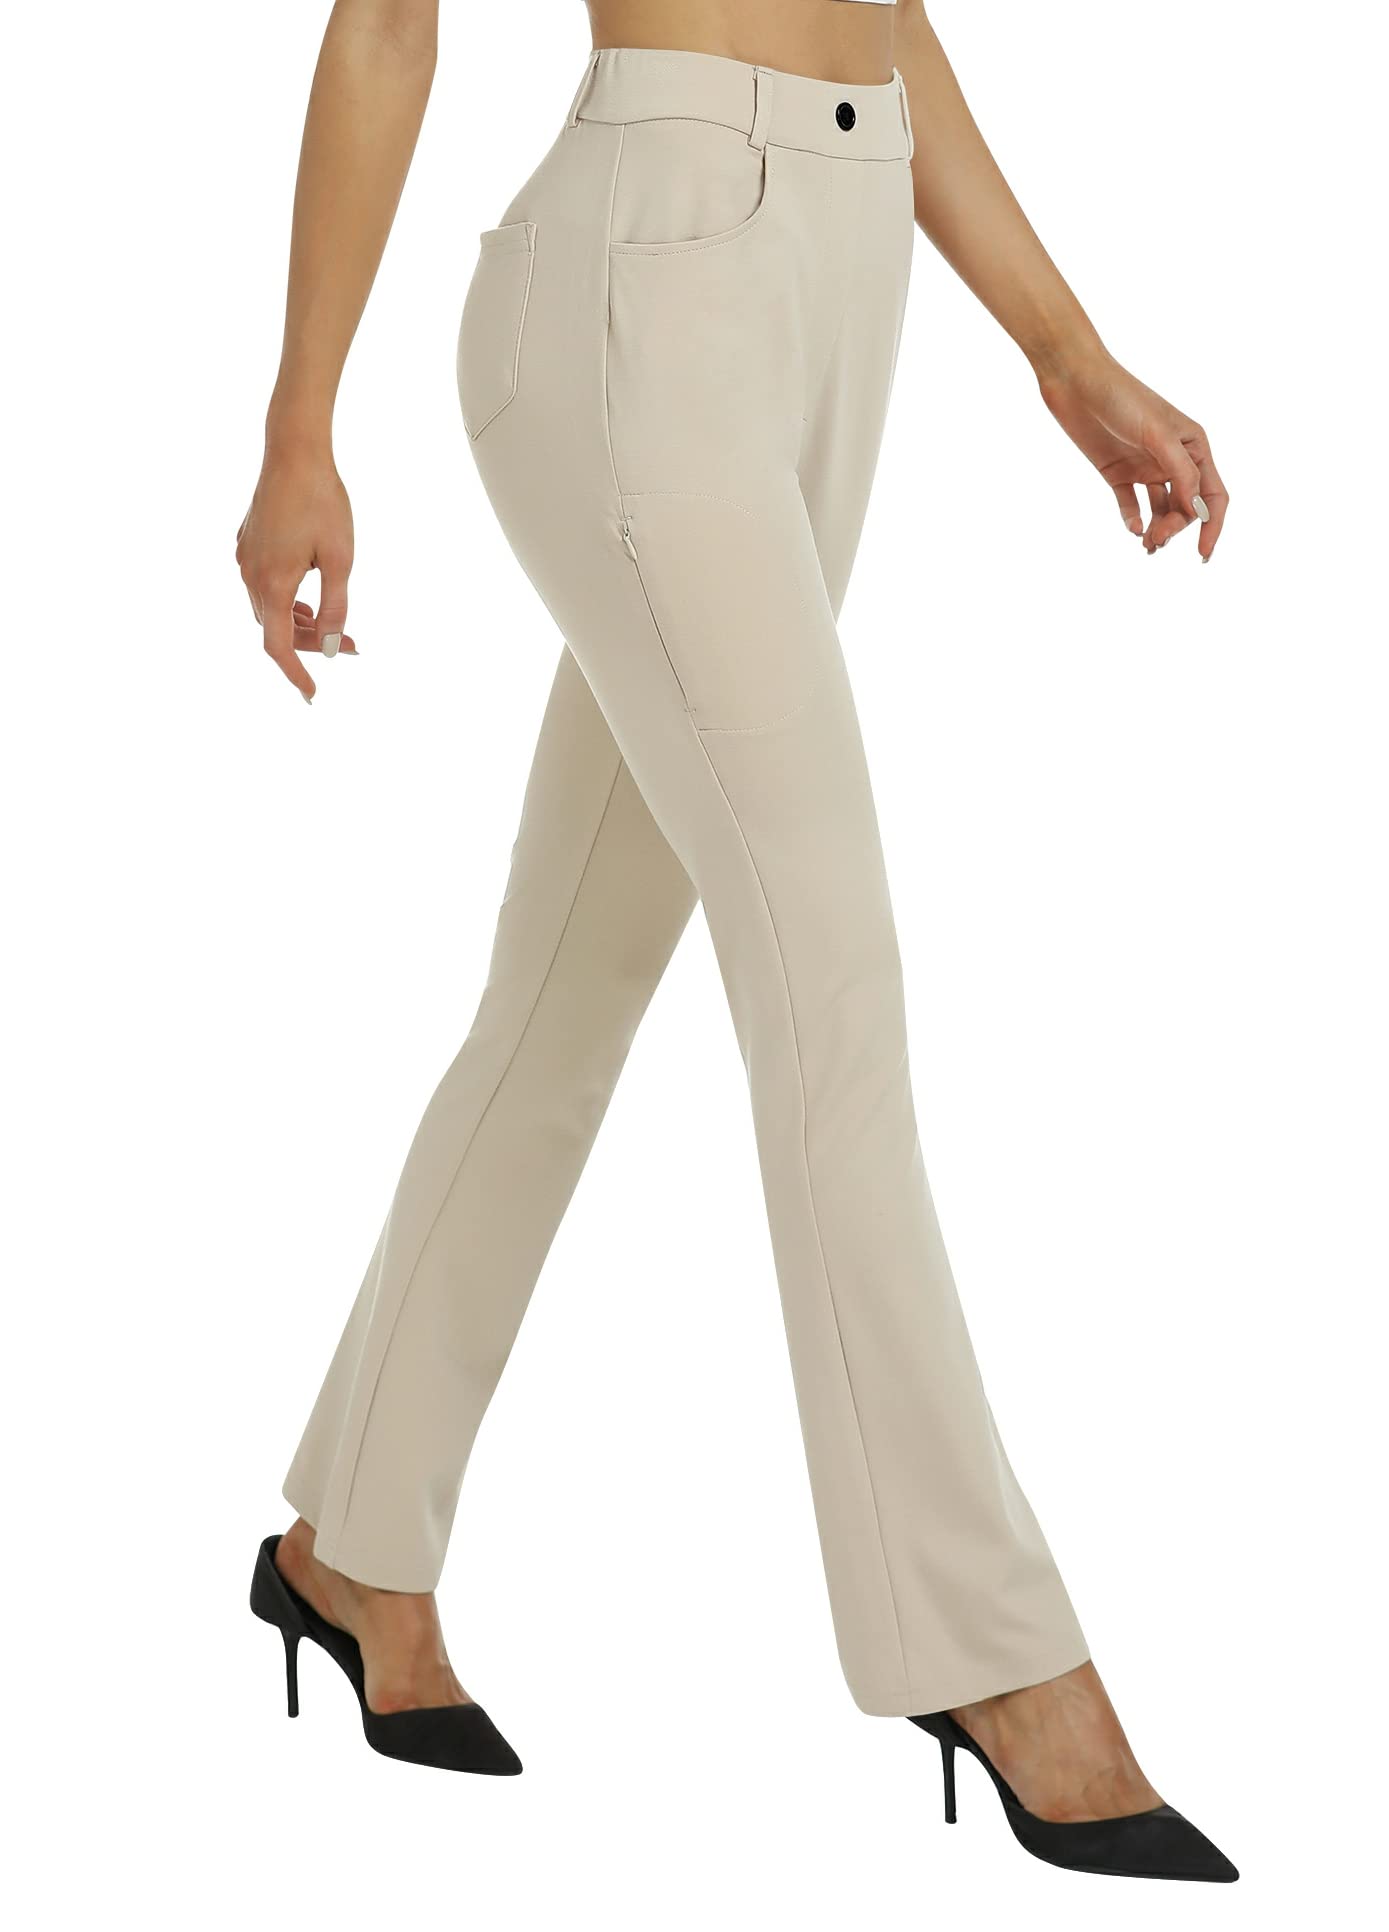 Women's Dress Pants Modern Fit High Waisted Stretchy Bootcut Trousers  Straight Leg Work Business Suit Pants